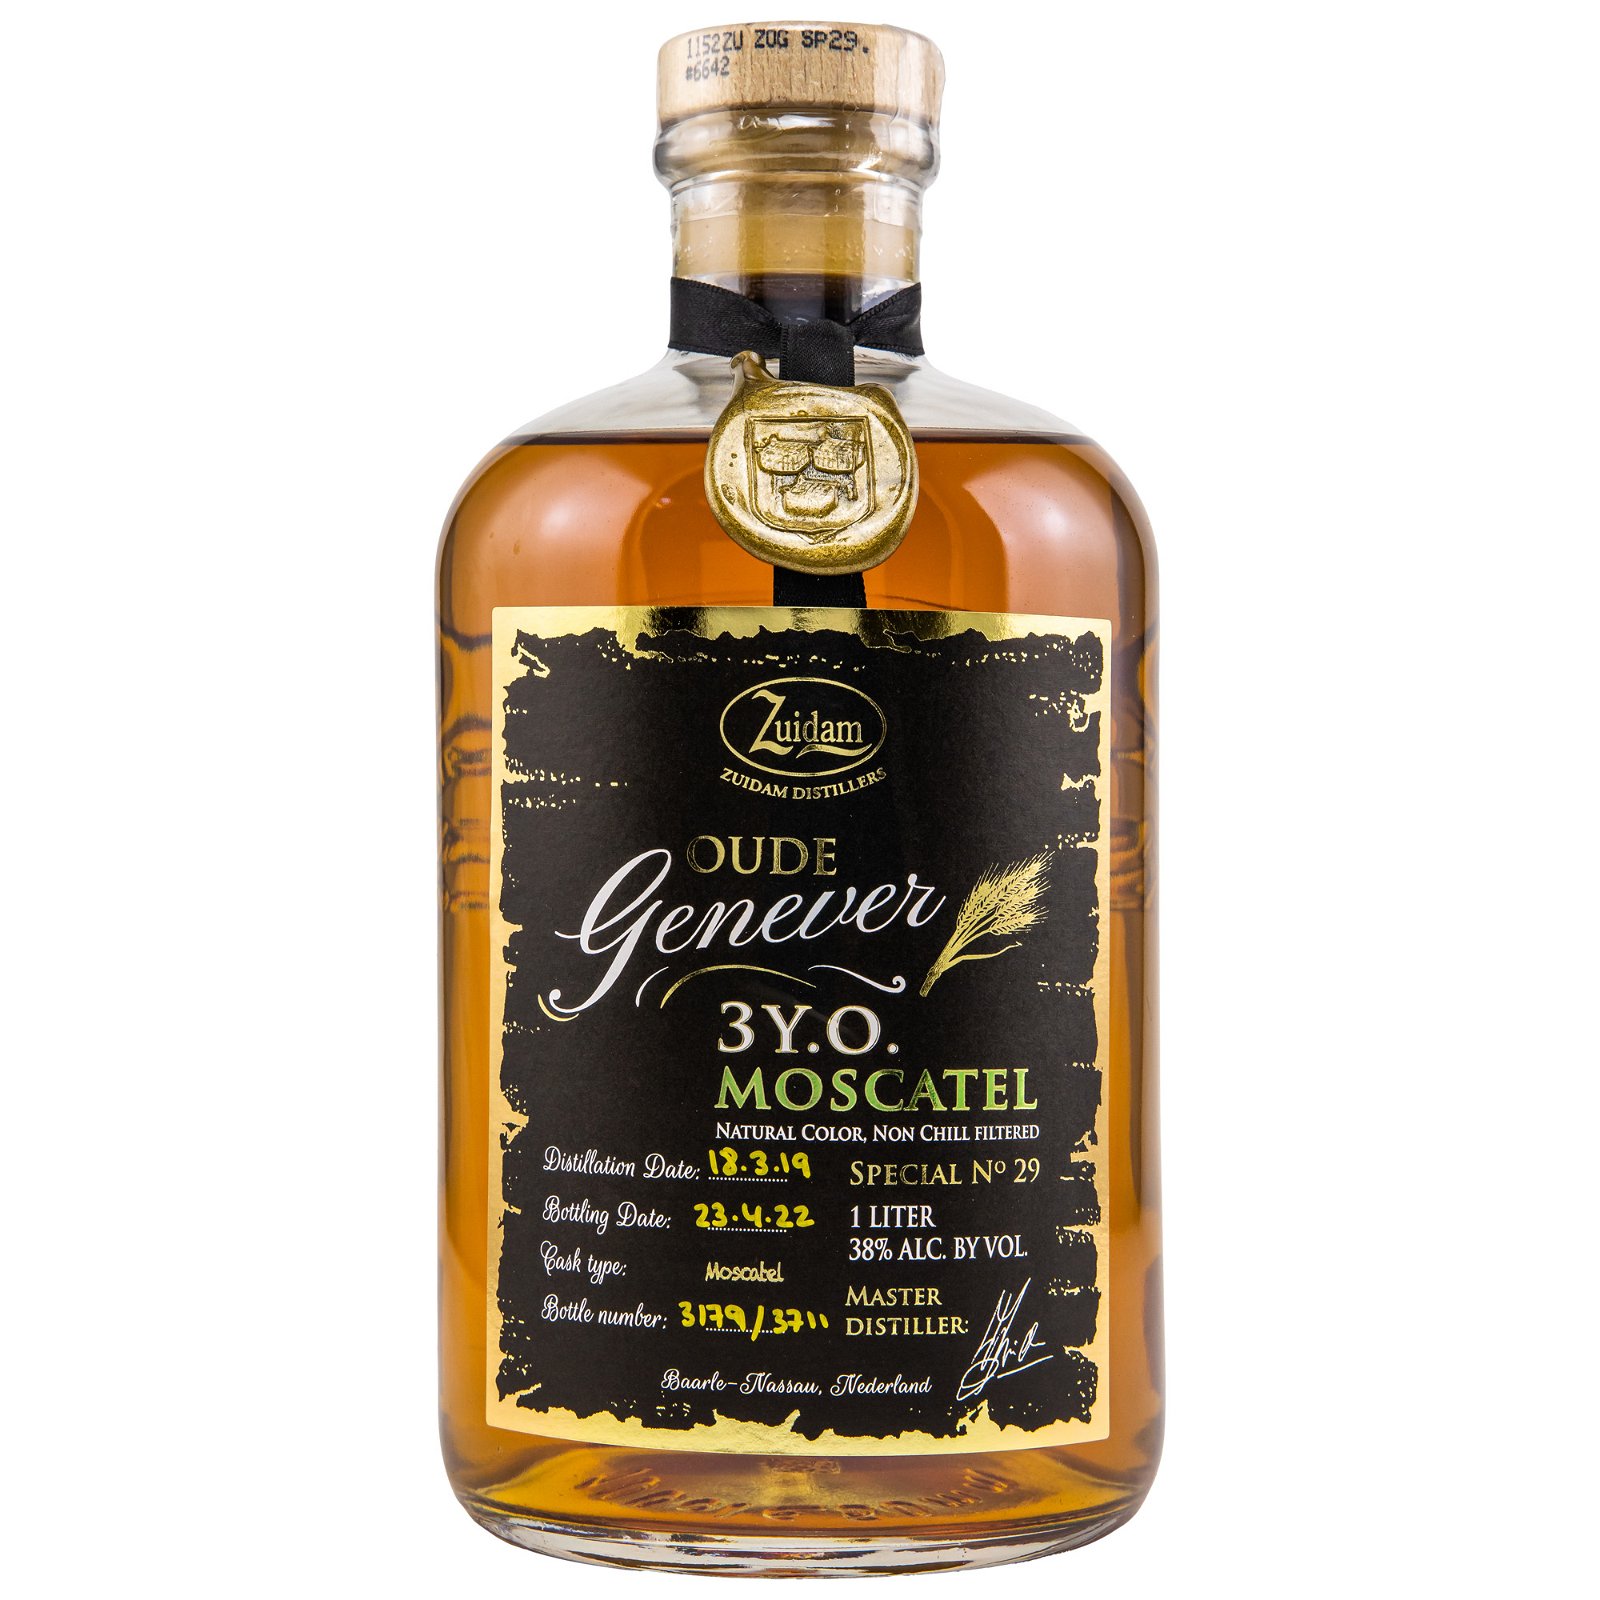 Zuidam 2019/2022 - 3 Jahre Oude Genever Moscatel Special No. 29 (Liter)